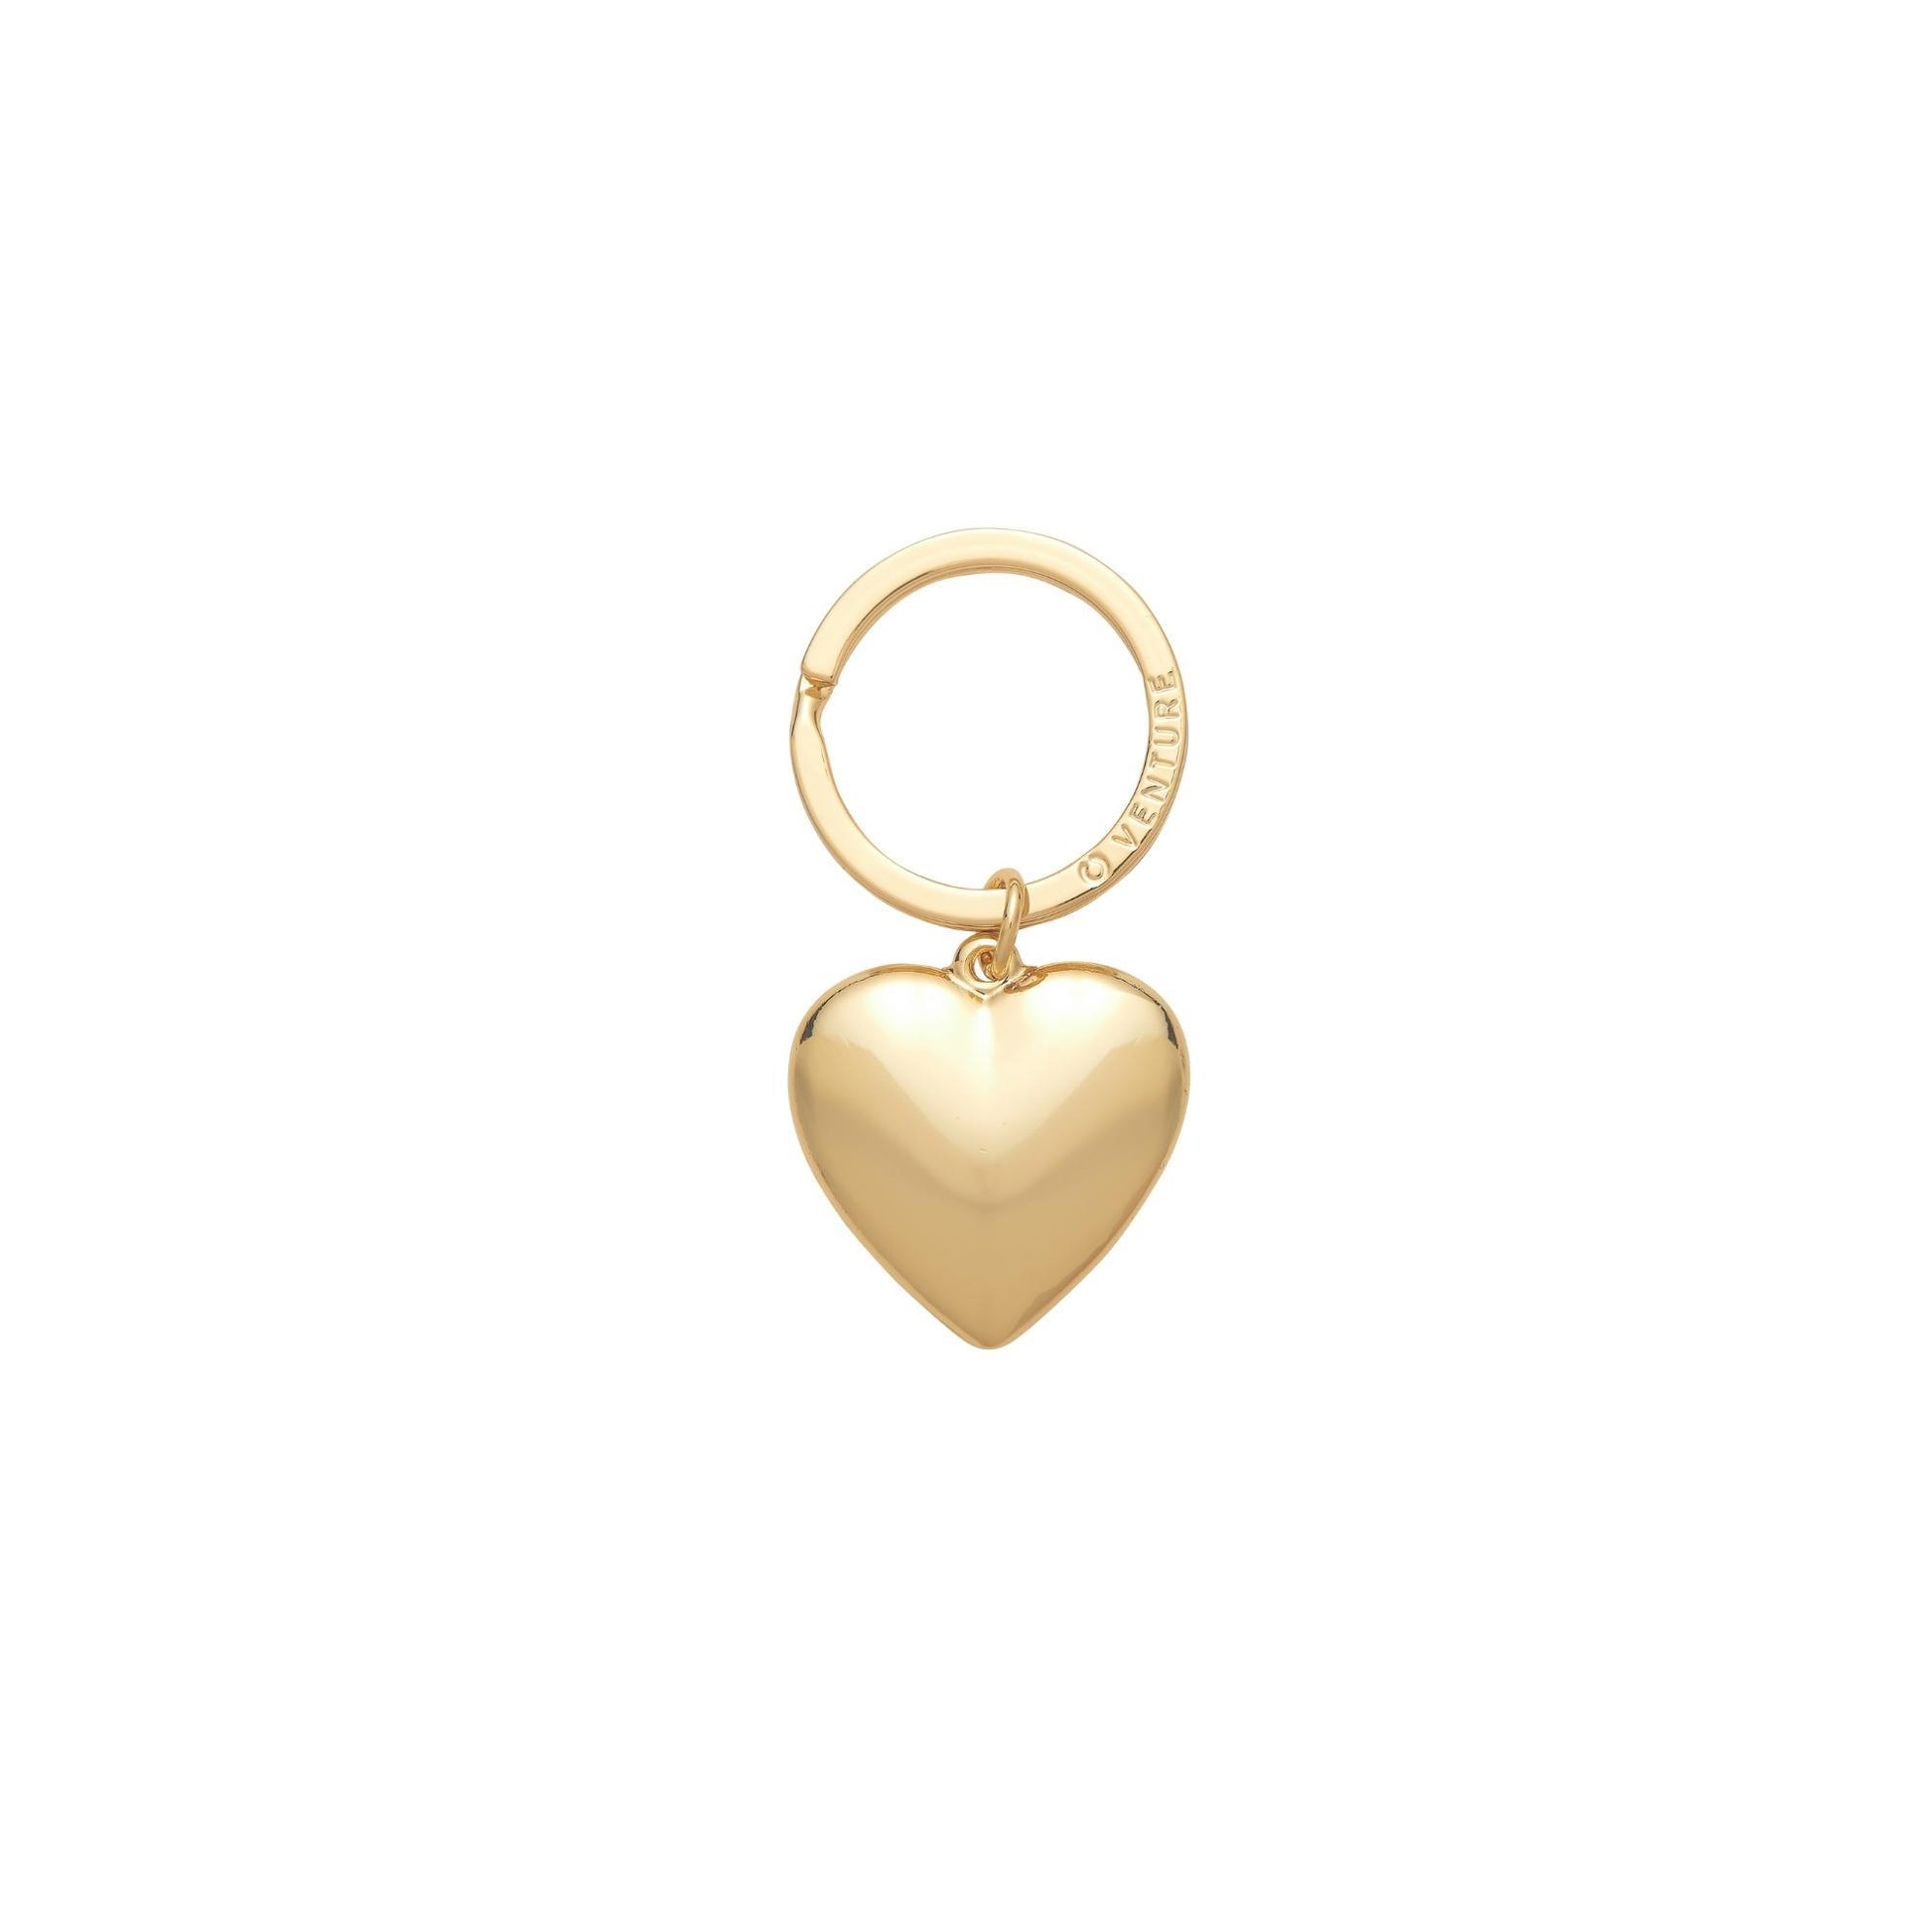 Gold puffy heart charm for your big o key ring.